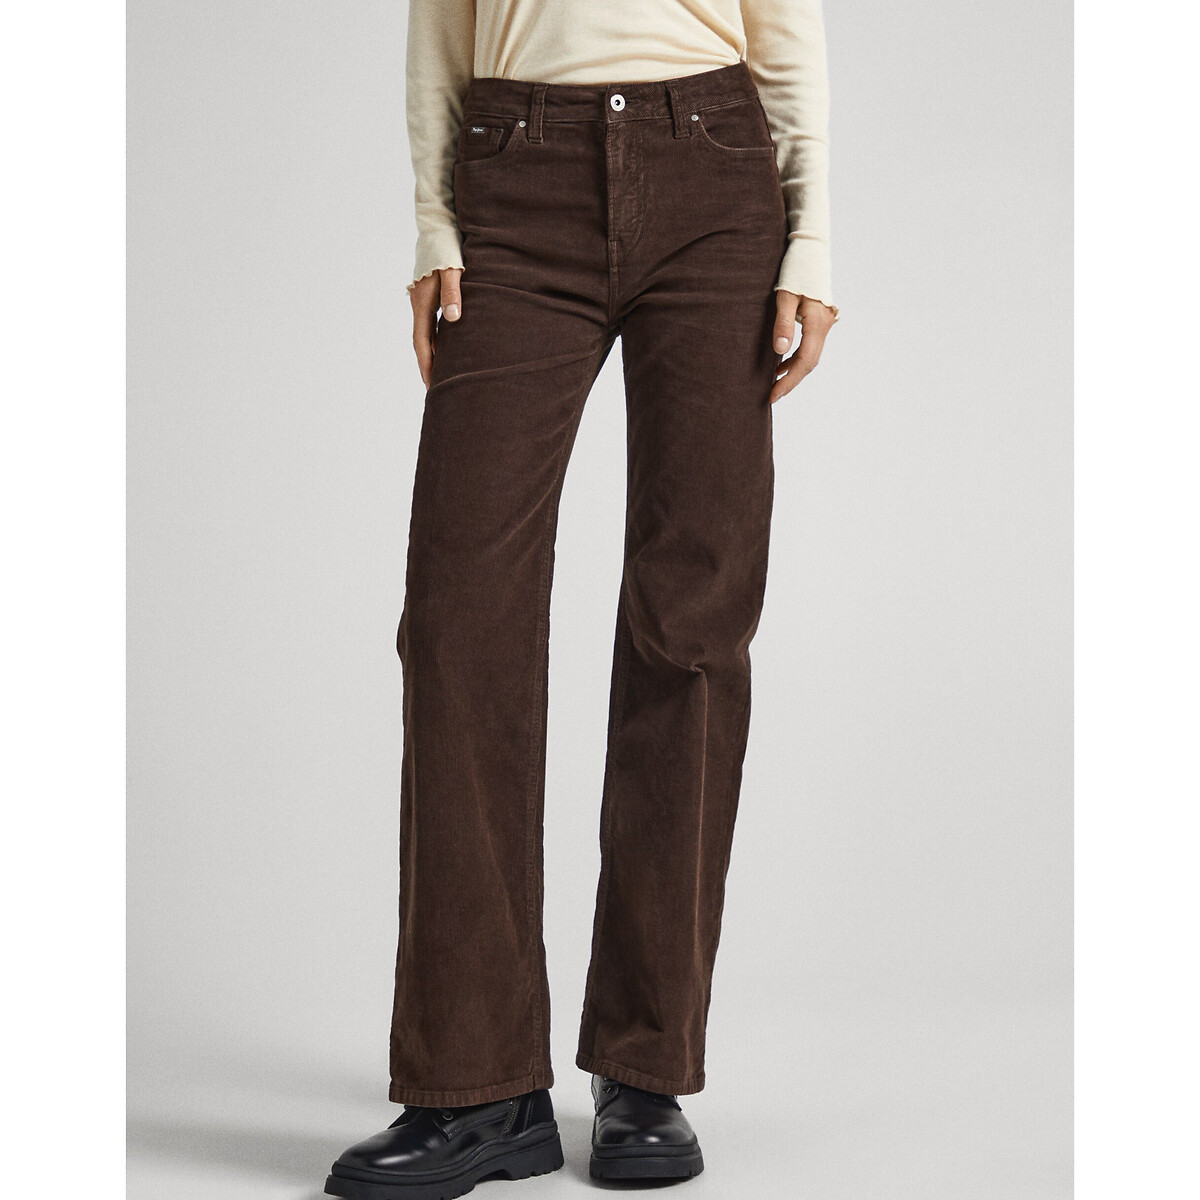 Image of Willa Cotton Flared Trousers